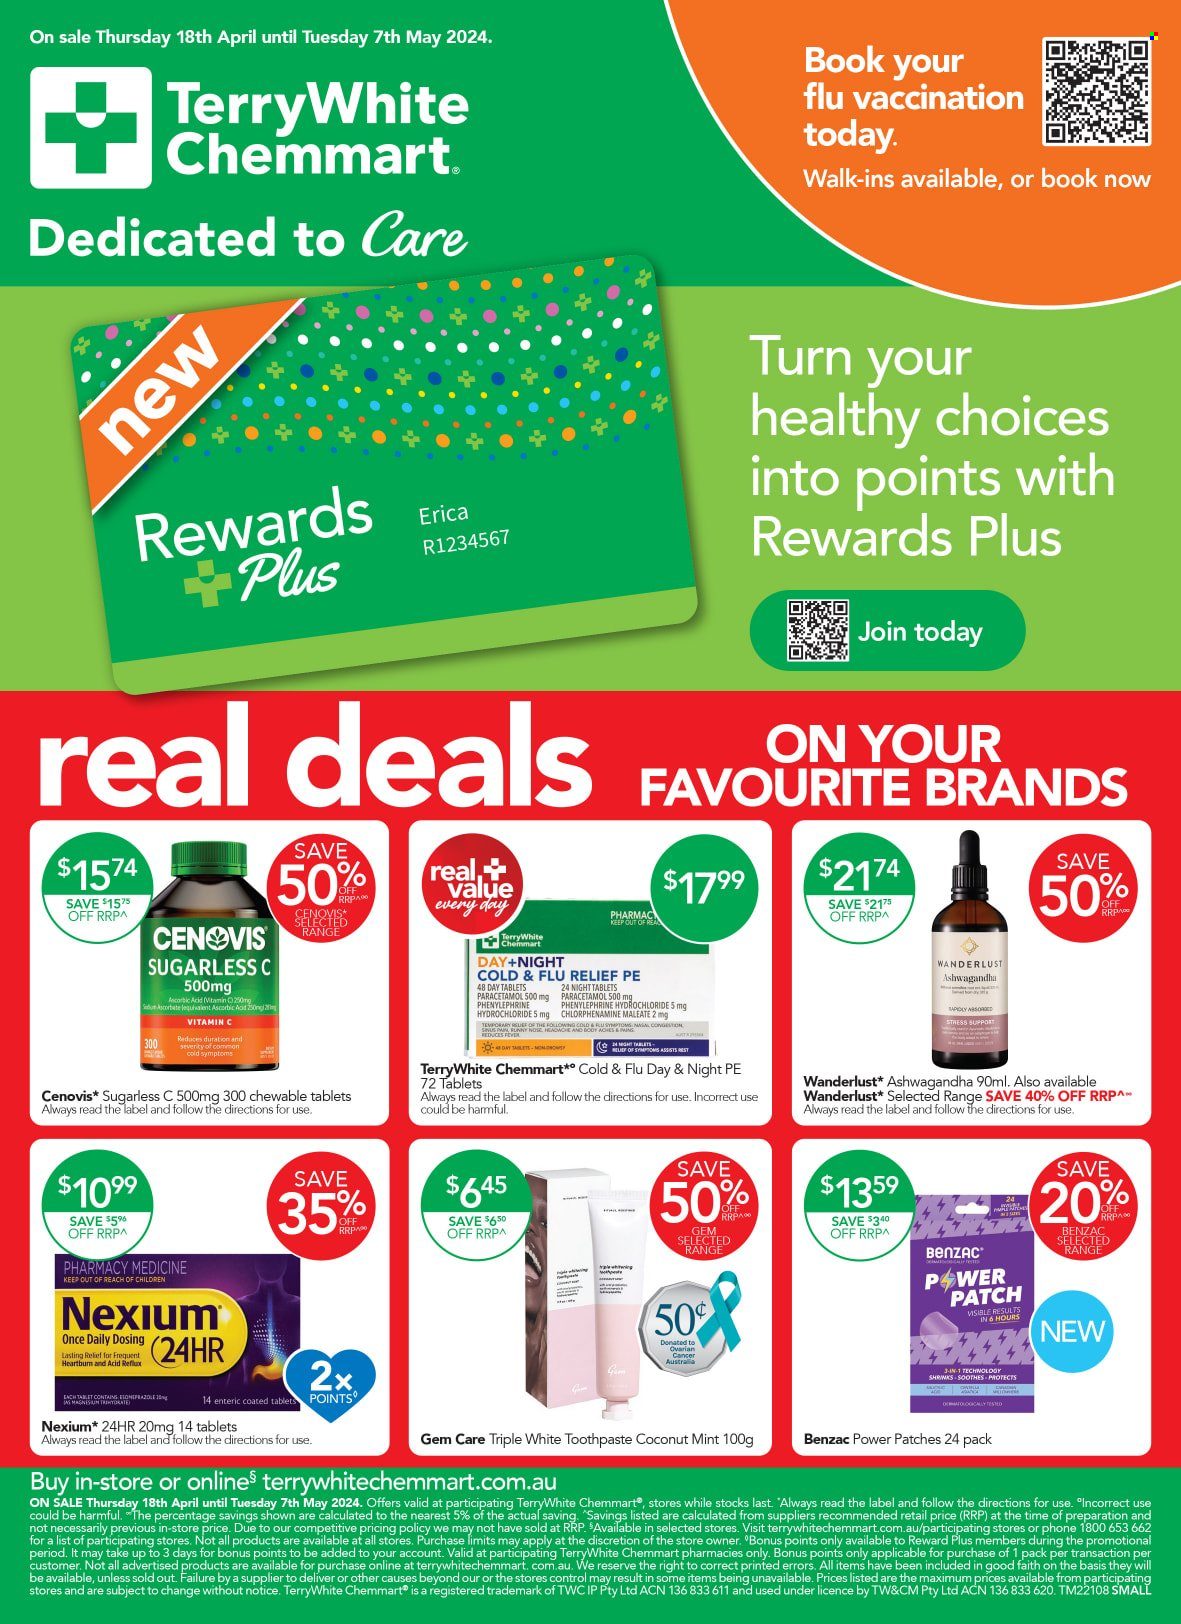 thumbnail - TerryWhite Chemmart Catalogue - 18 Apr 2024 - 7 May 2024 - Sales products - toothpaste, Cold & Flu, vitamin c, Nexium, Cenovis, health supplement, medicine, acid blocker. Page 1.